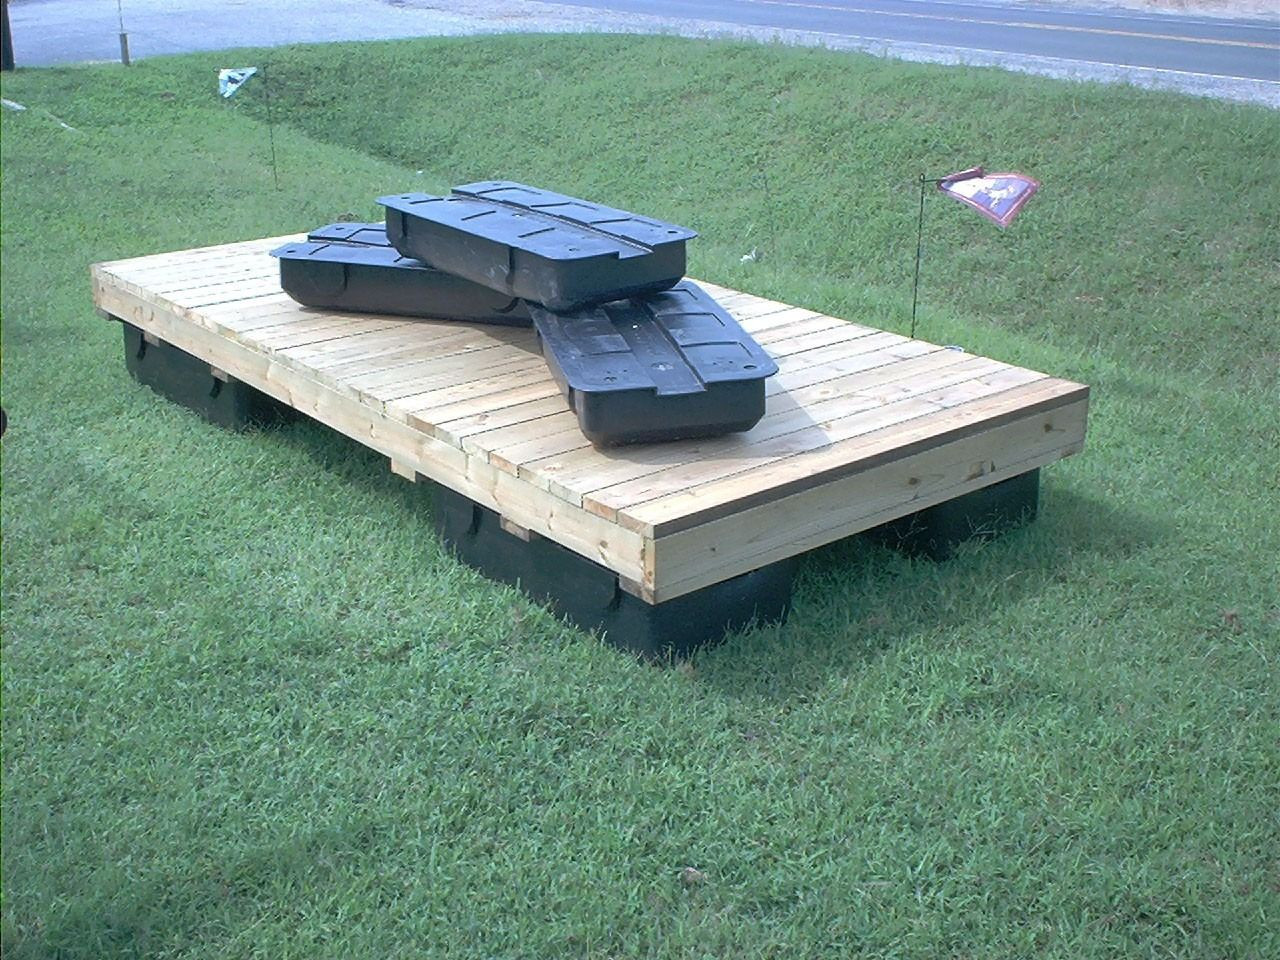 DIY Floating Dock Kits
 In our backyard there is a decent sized pond We want to